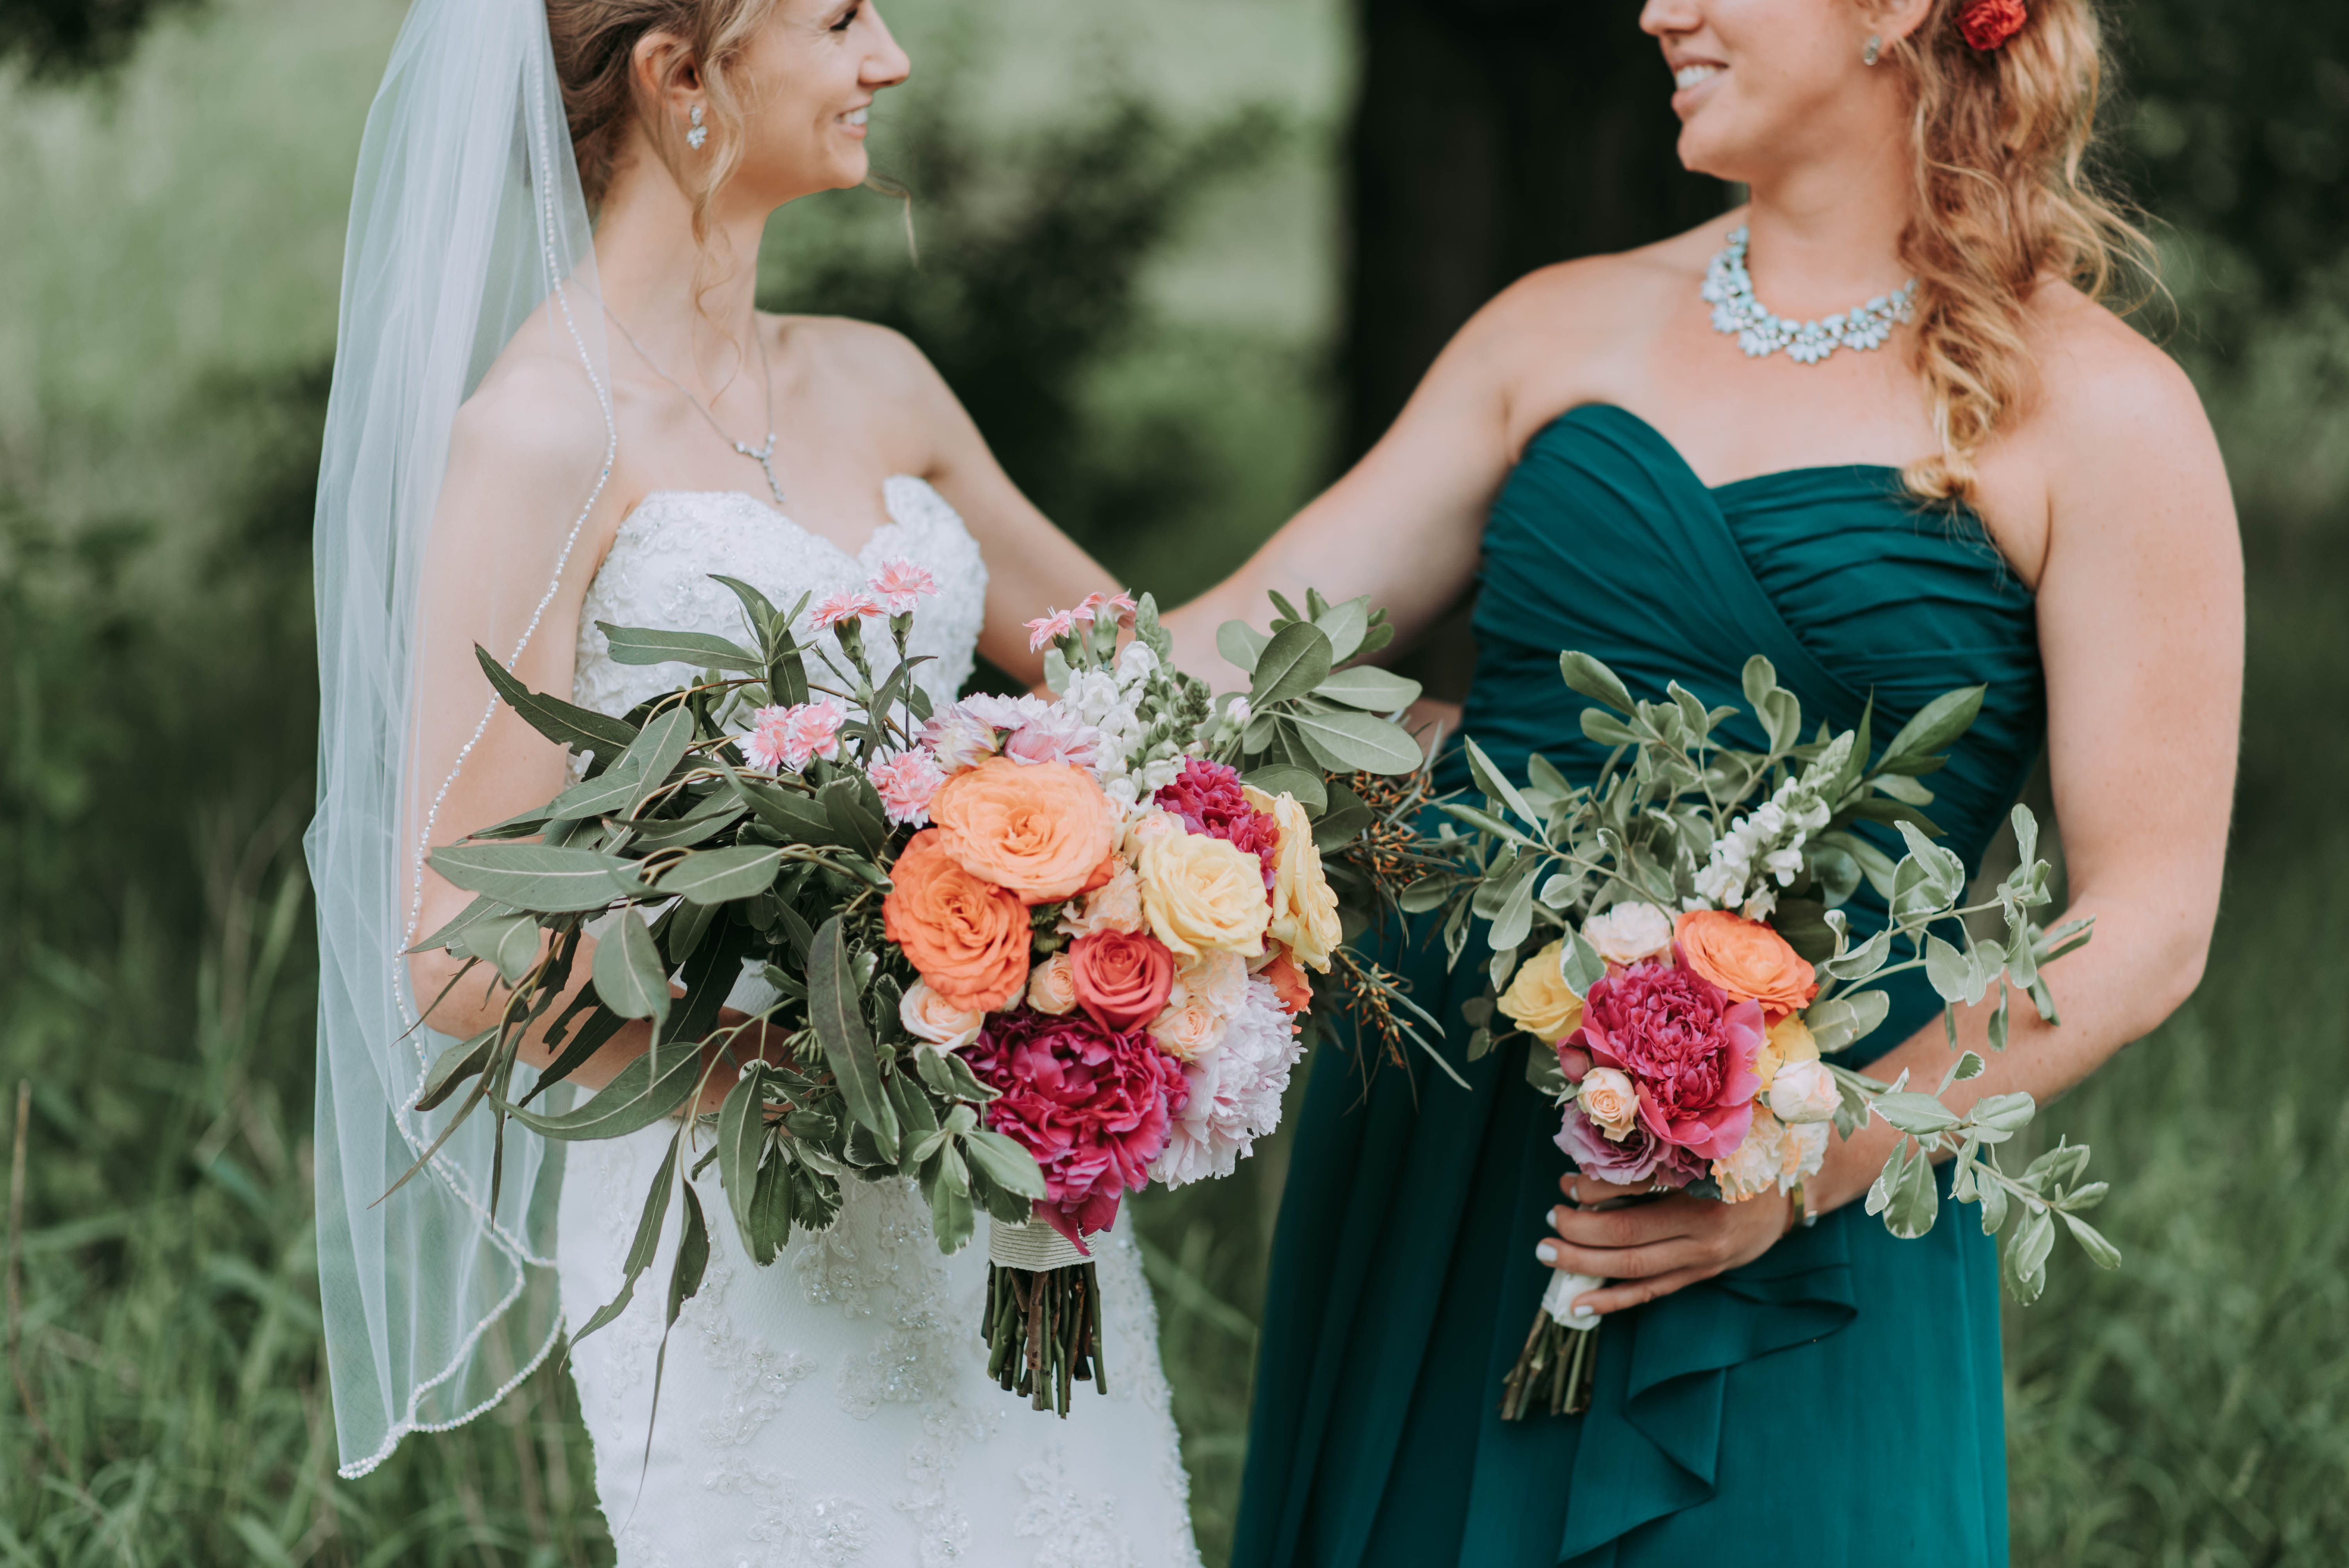 Maid of honor in green bridesmaid dress and bride in veil looking at each other smiling casually